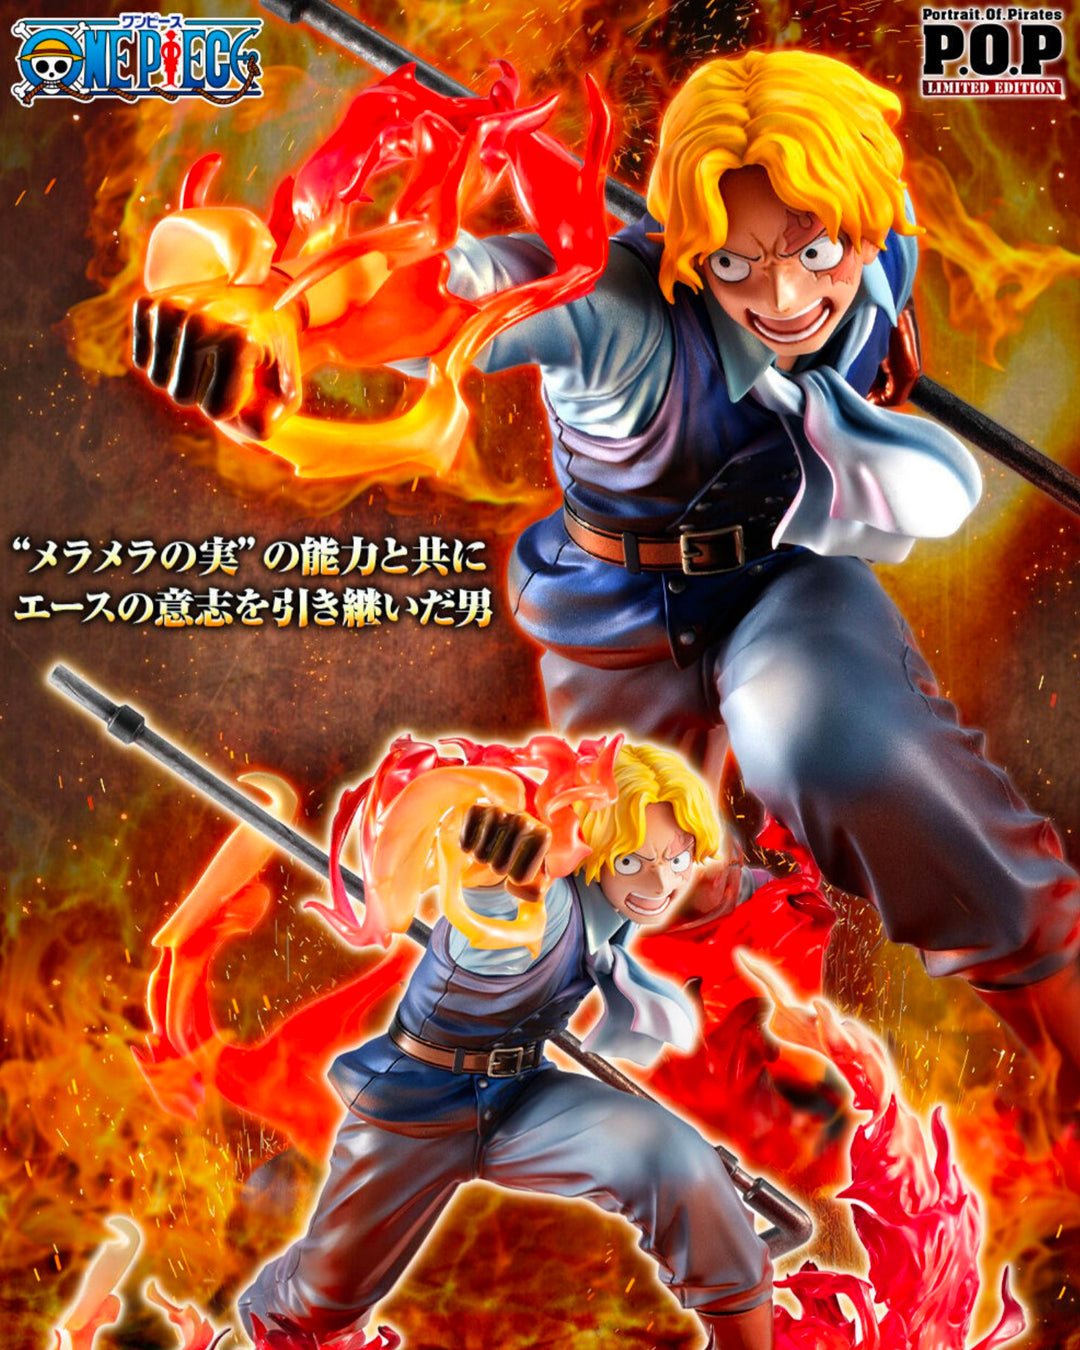 One Piece - Megahouse Portrait of Pirates P.O.P "Limited Edition" Sabo ~ Fire Fist Inheritance - Toys Funtasy